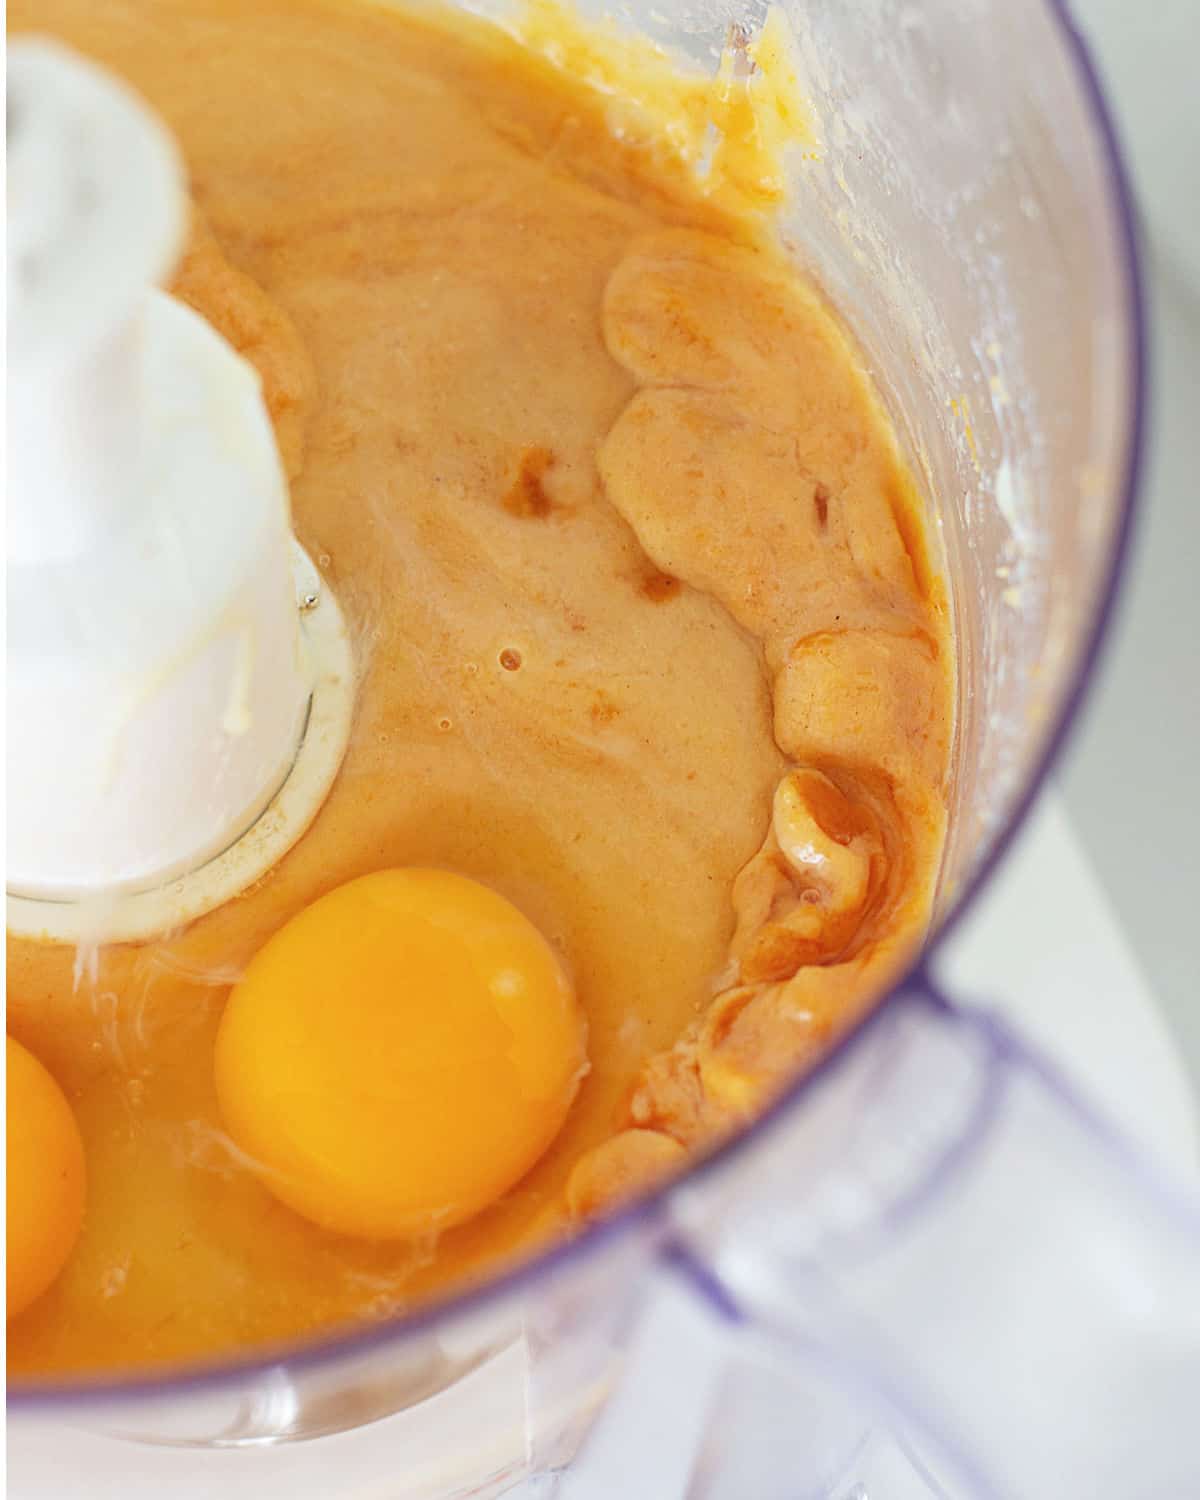 Eggs and sweet potato mixture inside of a food processor bowl.